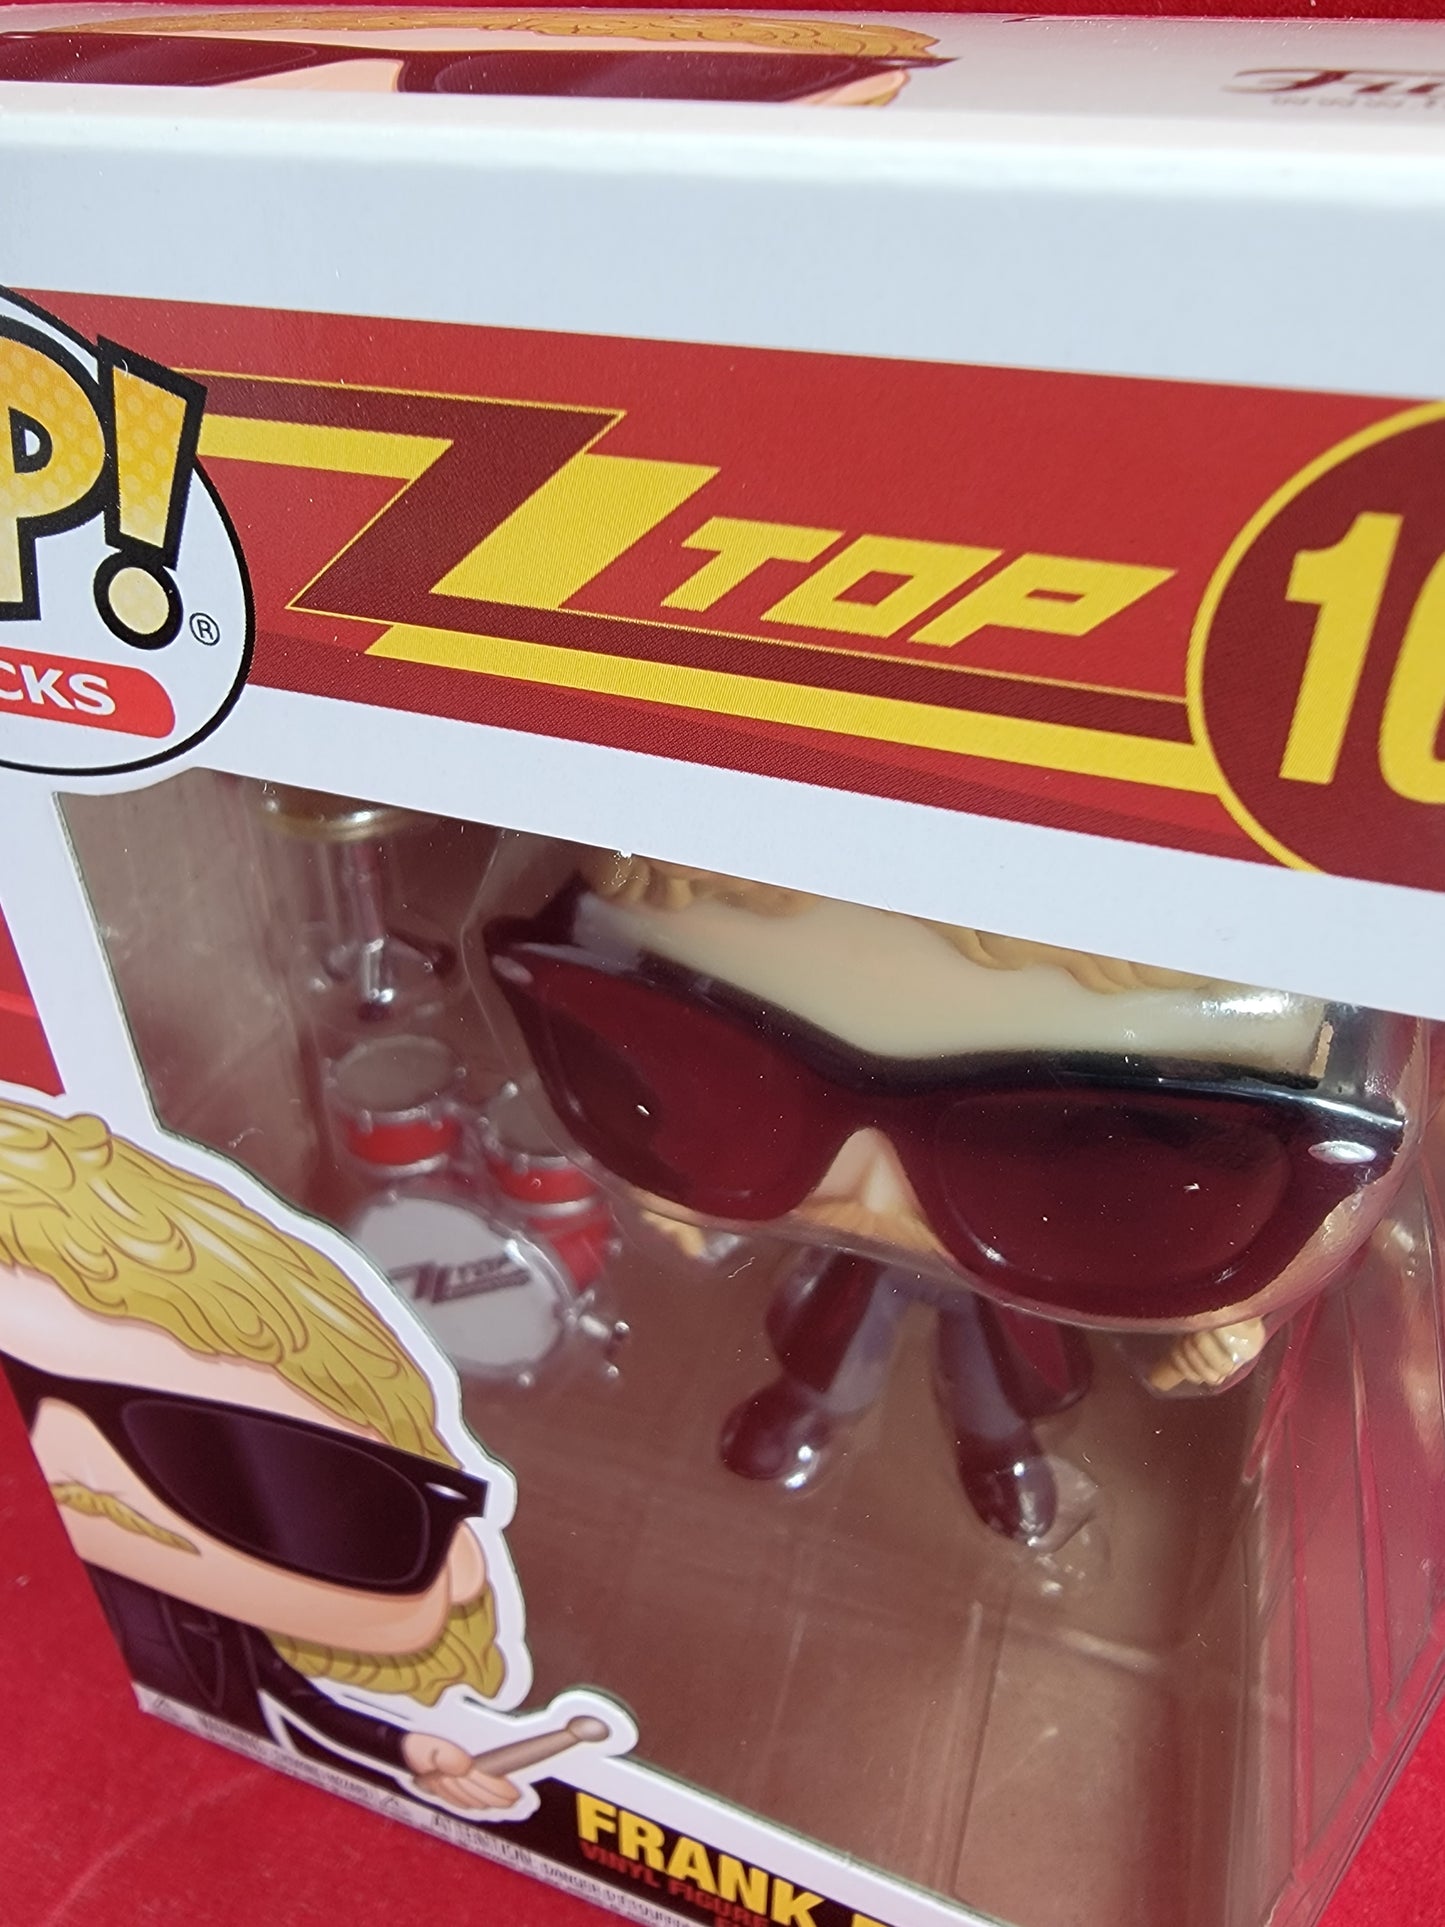 Frank beard funko # 166 (nib)
brand new drummer of zz top frank beard funko pop. pop has frank with drum sticks in hand. pop has a small zz top drum kit included. pop has a few lite scratches and will be shipped in a compatible pop protector.